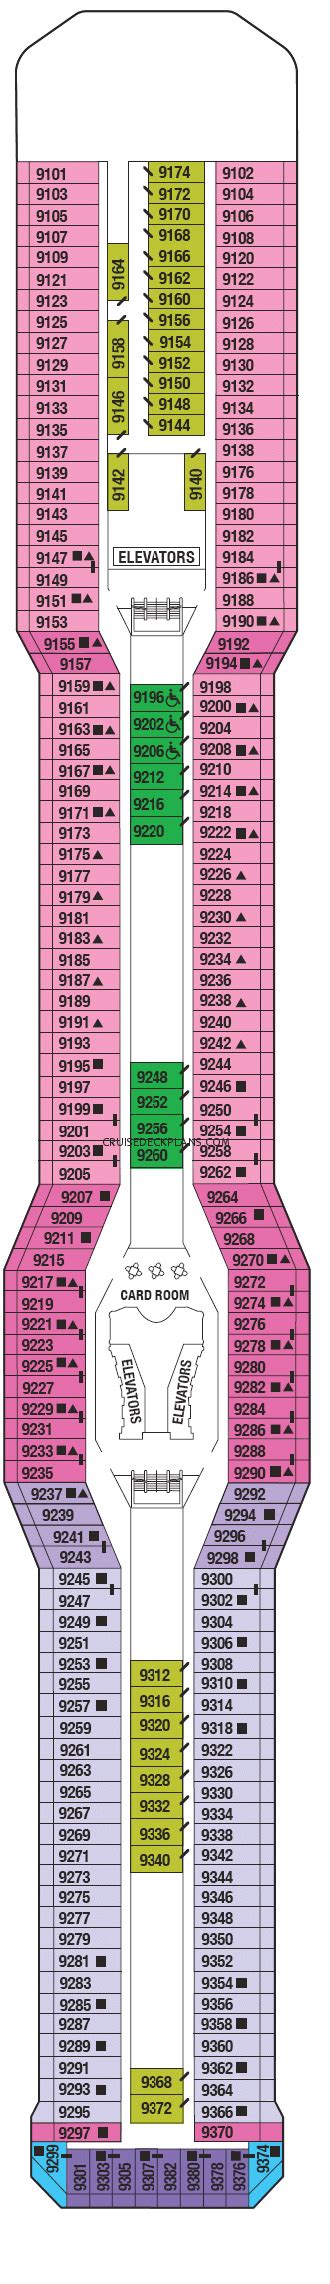 Celebrity equinox deck plans - Veranda: Balcony cabins on Celebrity Equinox are known as Veranda. They run 194 square feet with 54-square-foot balconies and can be found on decks 6 to 9. Balcony furniture consists of a round ... 